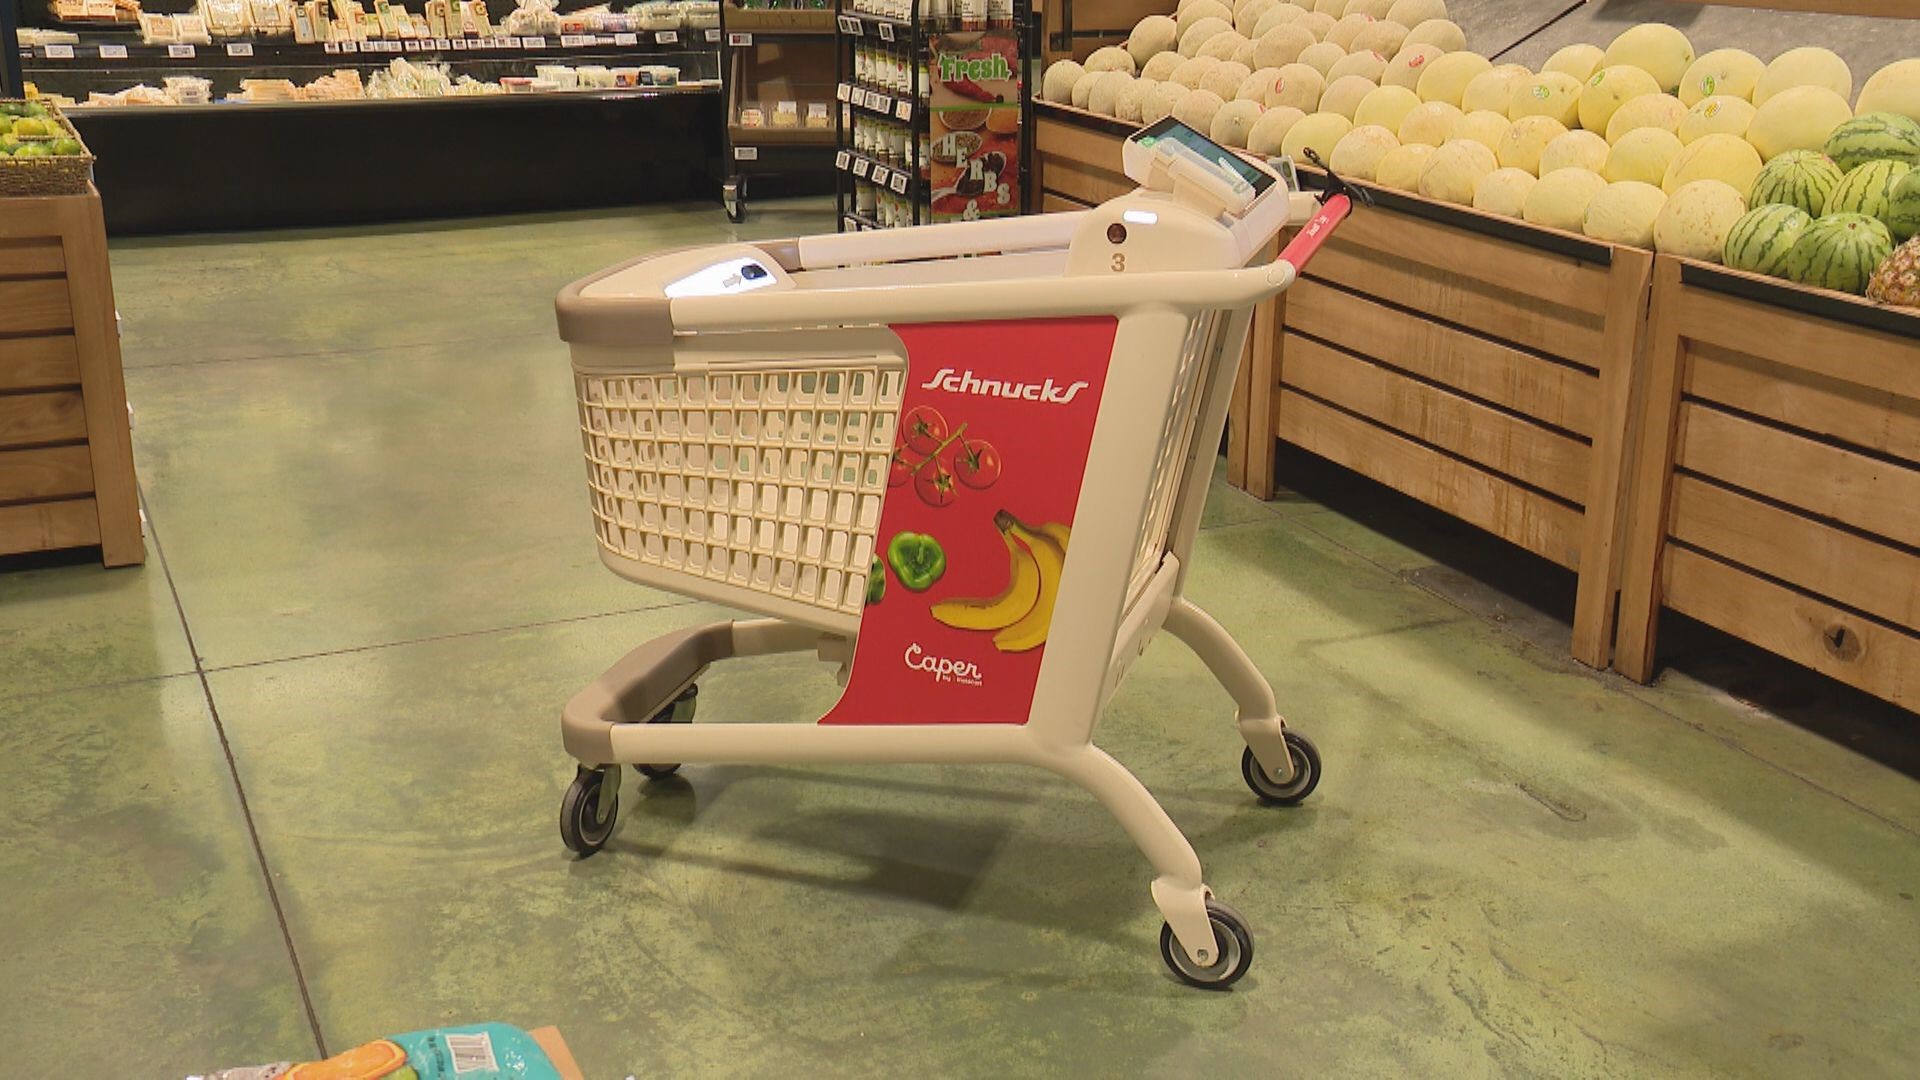 Schuncks and Caper are testing AI-powered shopping carts. The grocery store has these carts at two St. Louis area stores.